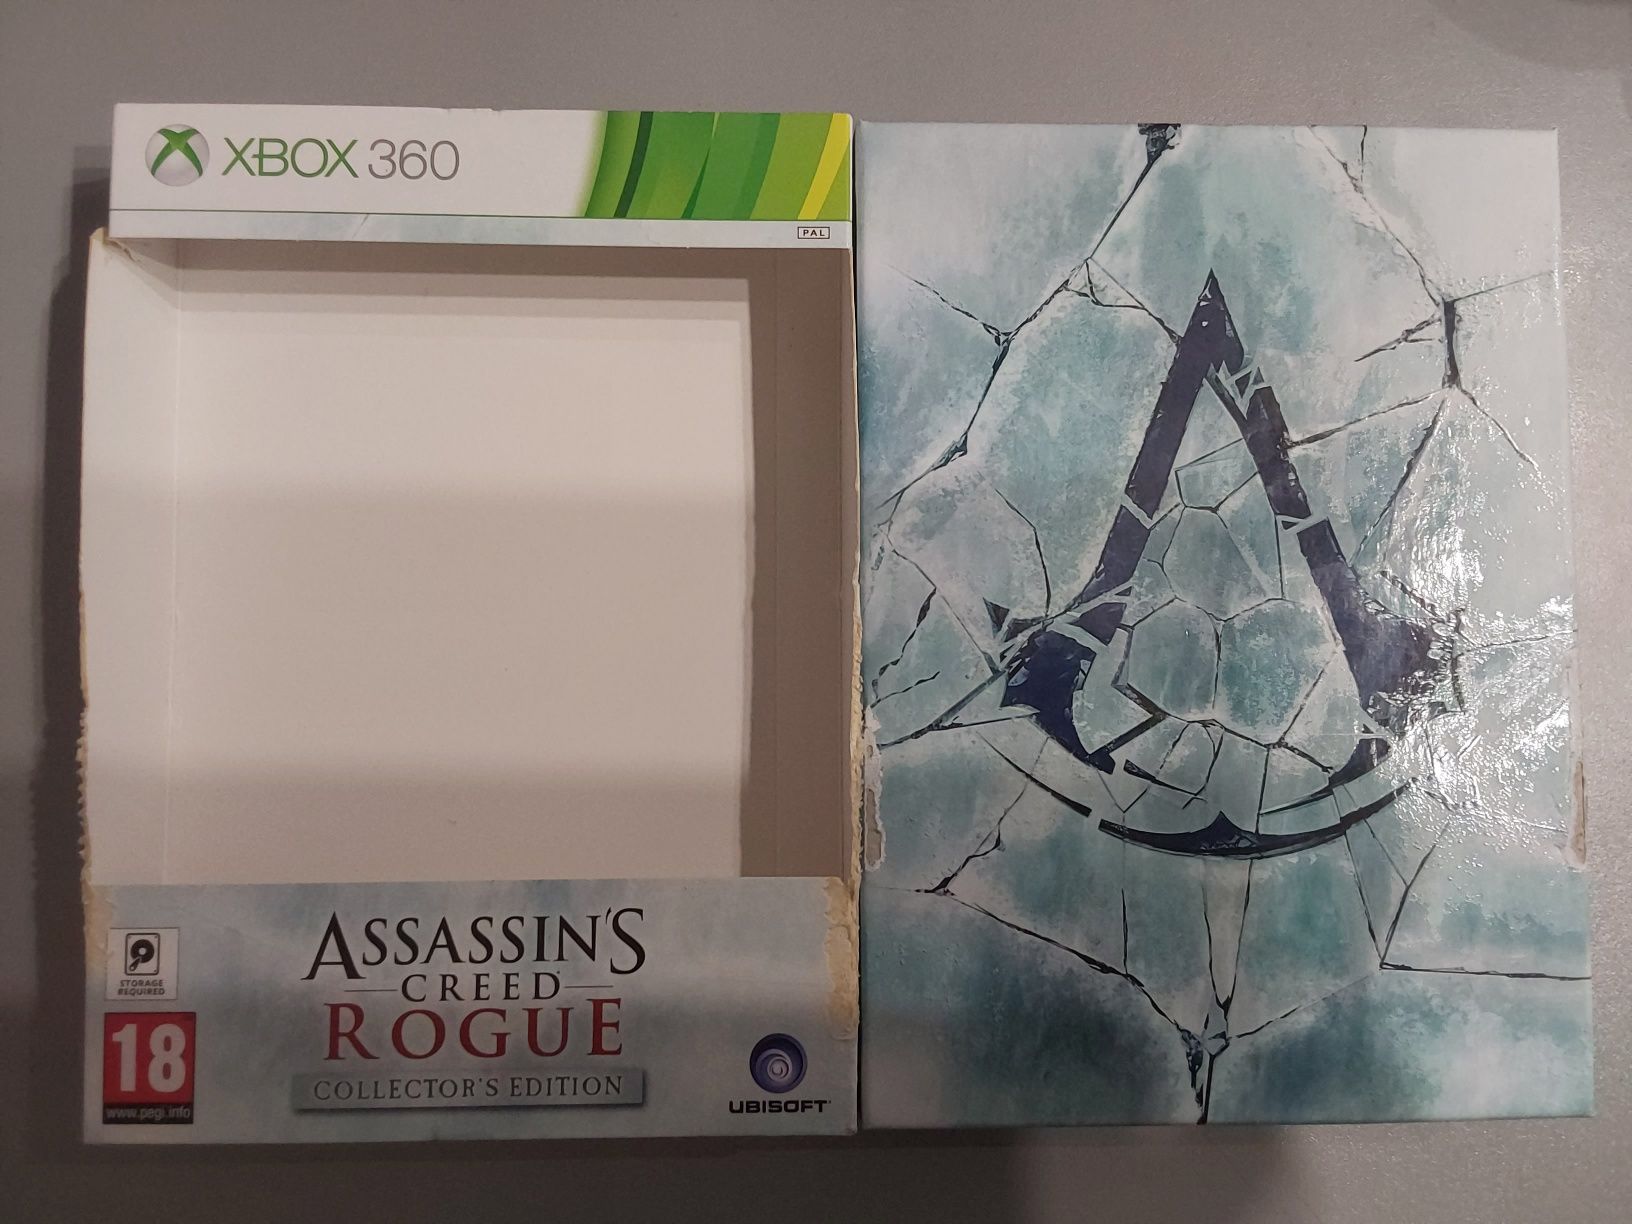 Assassin's Creed Rogue: Collector's Edition (Xbox 360)